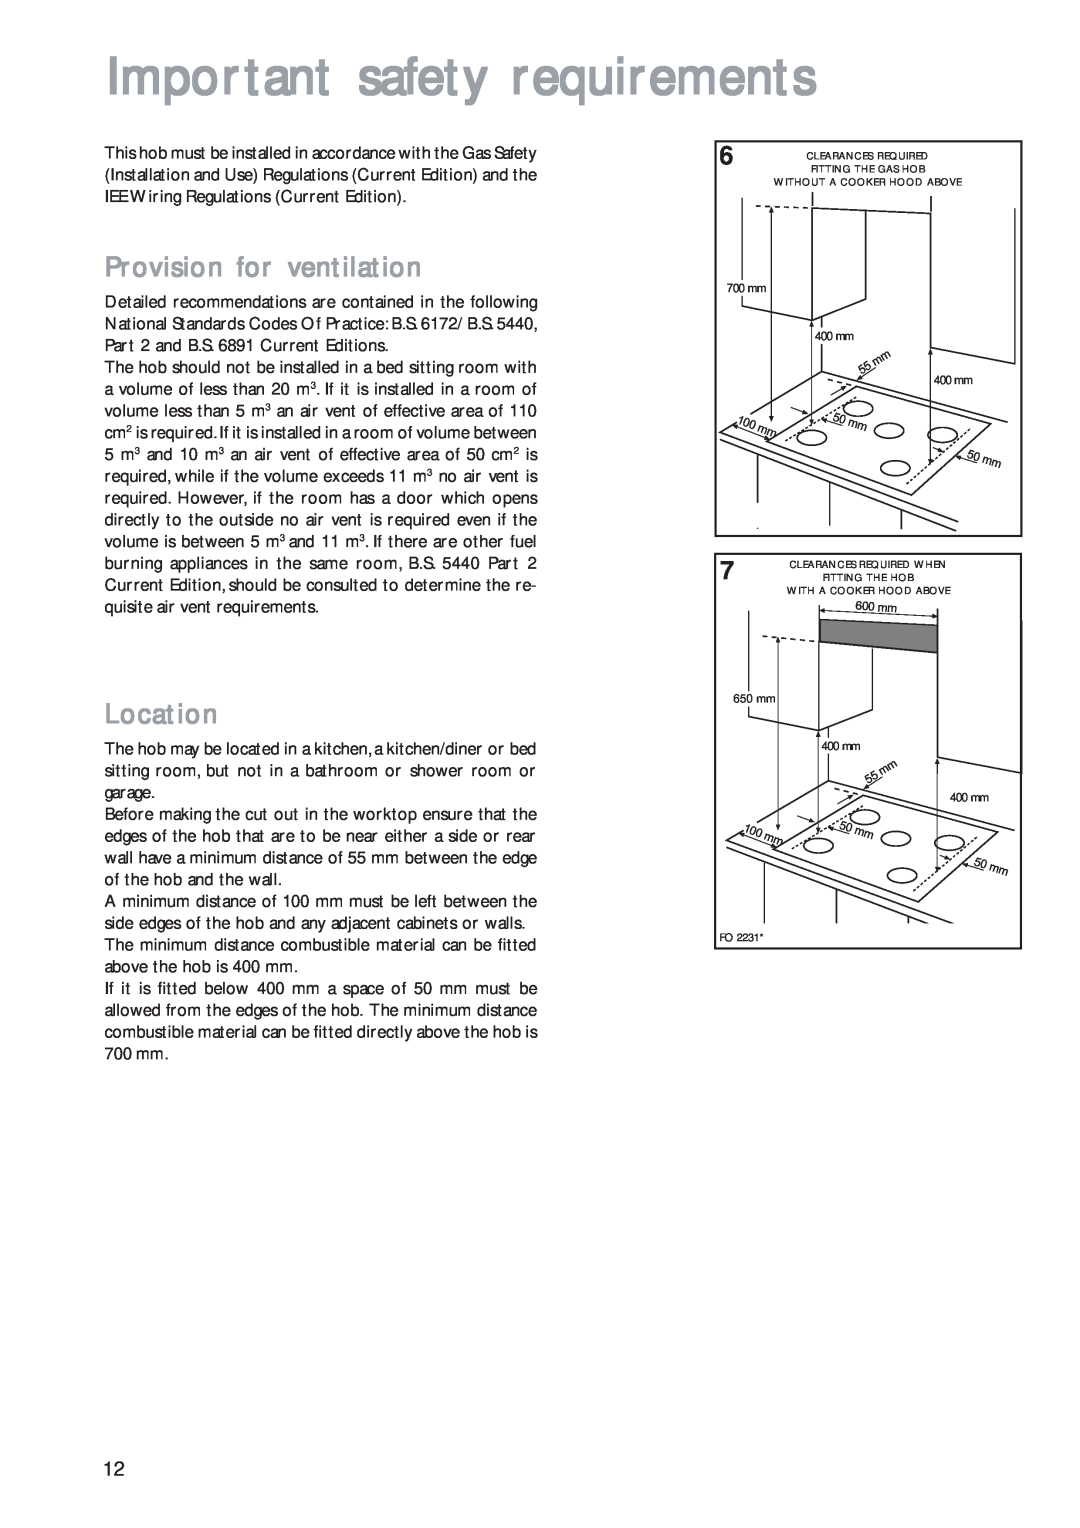 John Lewis JLBIGH601 instruction manual Important safety requirements, Provision for ventilation, Location 